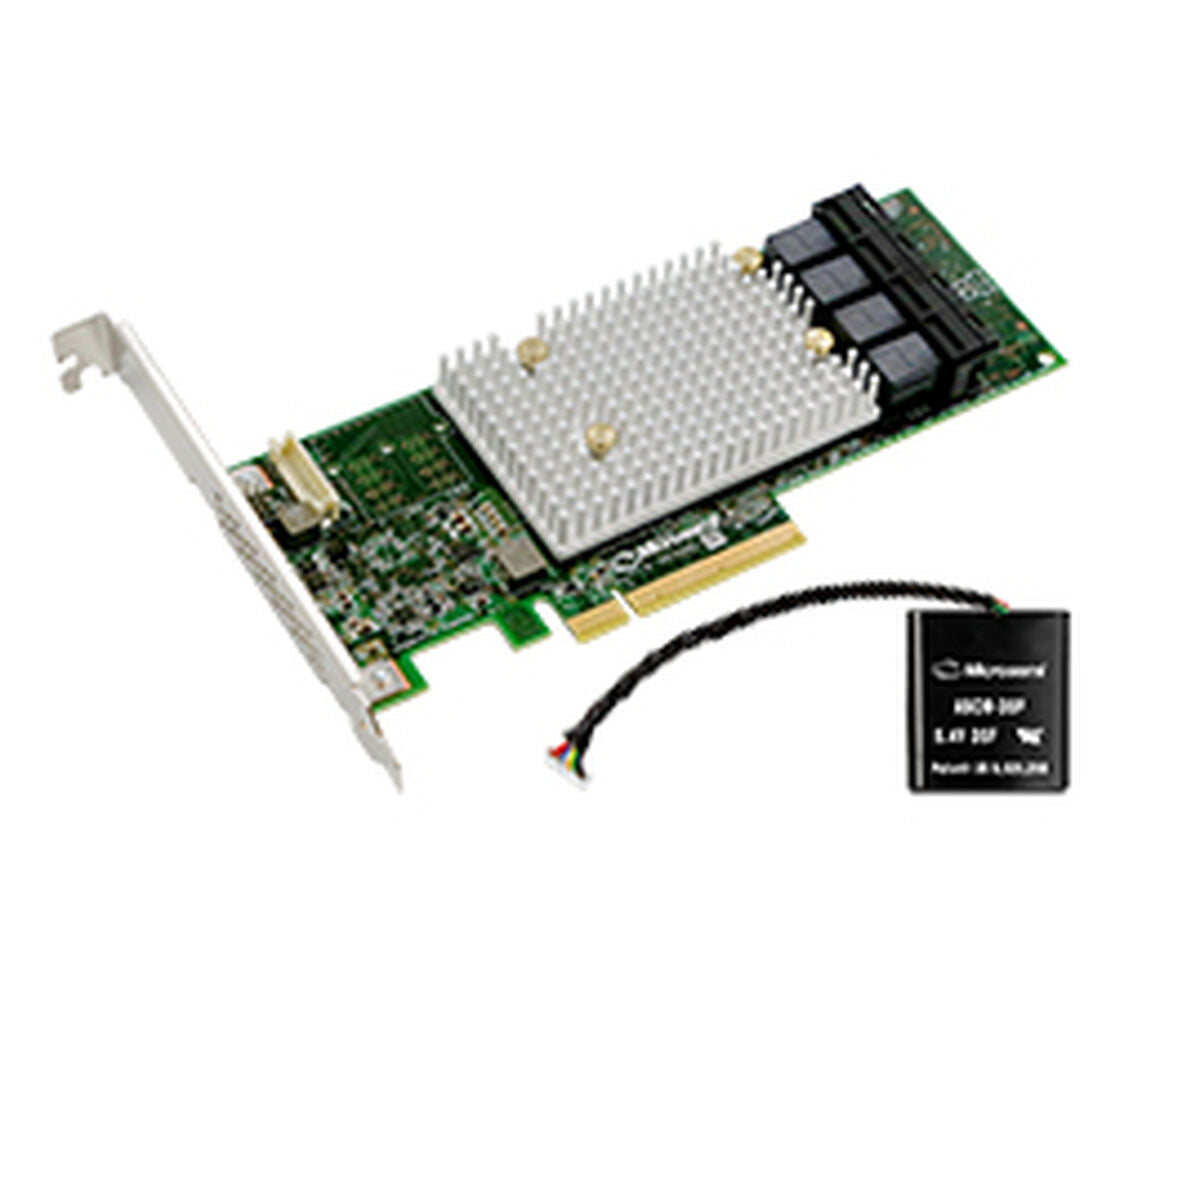 RAID controller card Microchip 3154-16I 12 GB/s, Microchip, Computing, Components, raid-controller-card-microchip-3154-16i-12-gb-s, Brand_Microchip, category-reference-2609, category-reference-2803, category-reference-2811, category-reference-t-19685, category-reference-t-19912, category-reference-t-21360, category-reference-t-25662, category-reference-t-29829, computers / components, Condition_NEW, Price_+ 1000, Teleworking, RiotNook